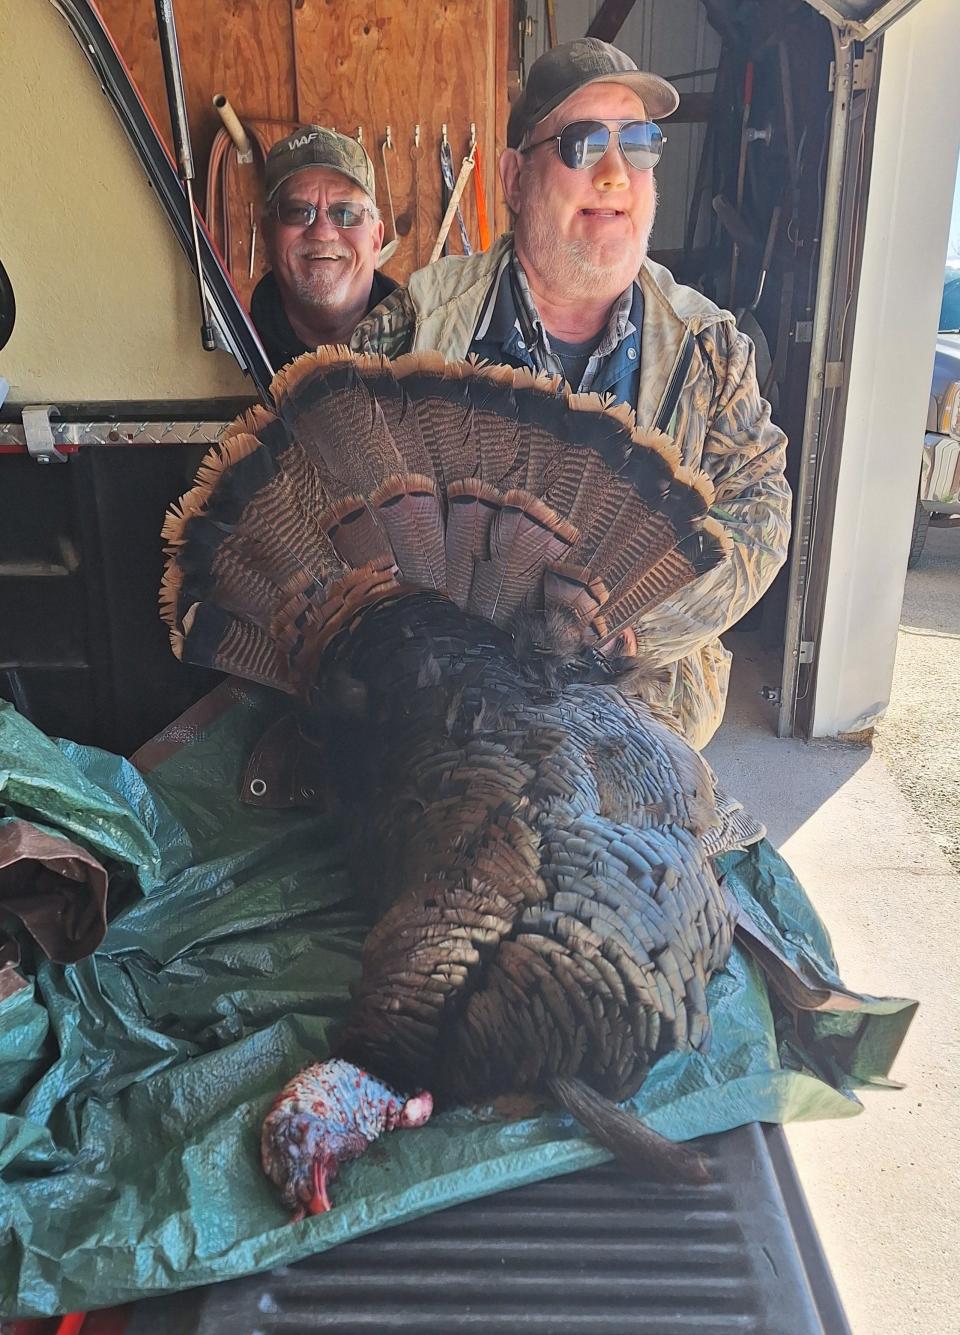 Rick Schuh (left) looks on as Bob Schuh shows the tom turkey he shot on April 24. The tom weighed in at 23 pounds, sported an 8-inch beard with 7/8-inch spurs. He was hunting in the Kellnersville area.